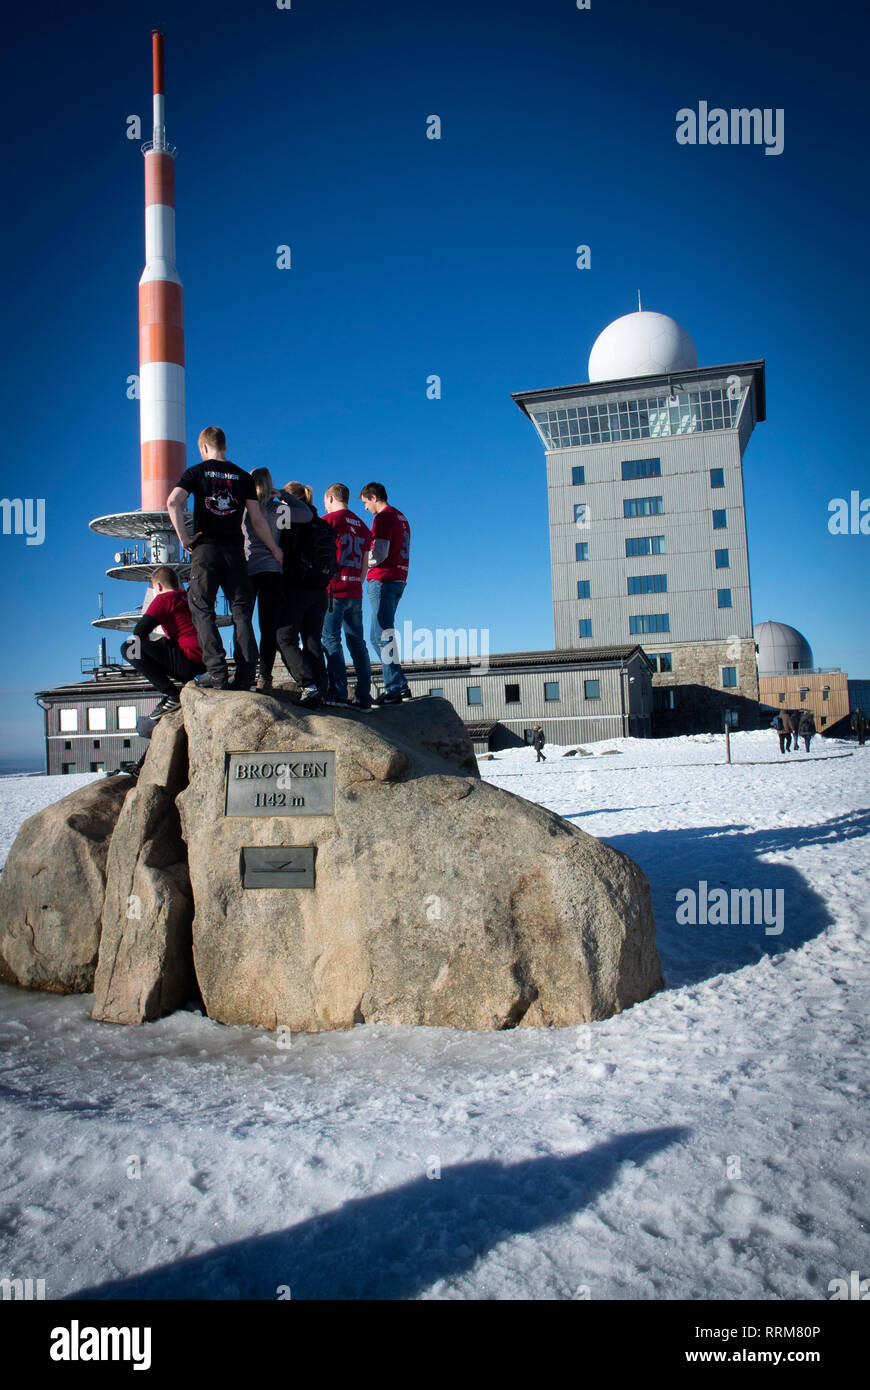 Walkers on the snow covered sumit of The Brocken in The Harz National Park, Germany Stock Photo